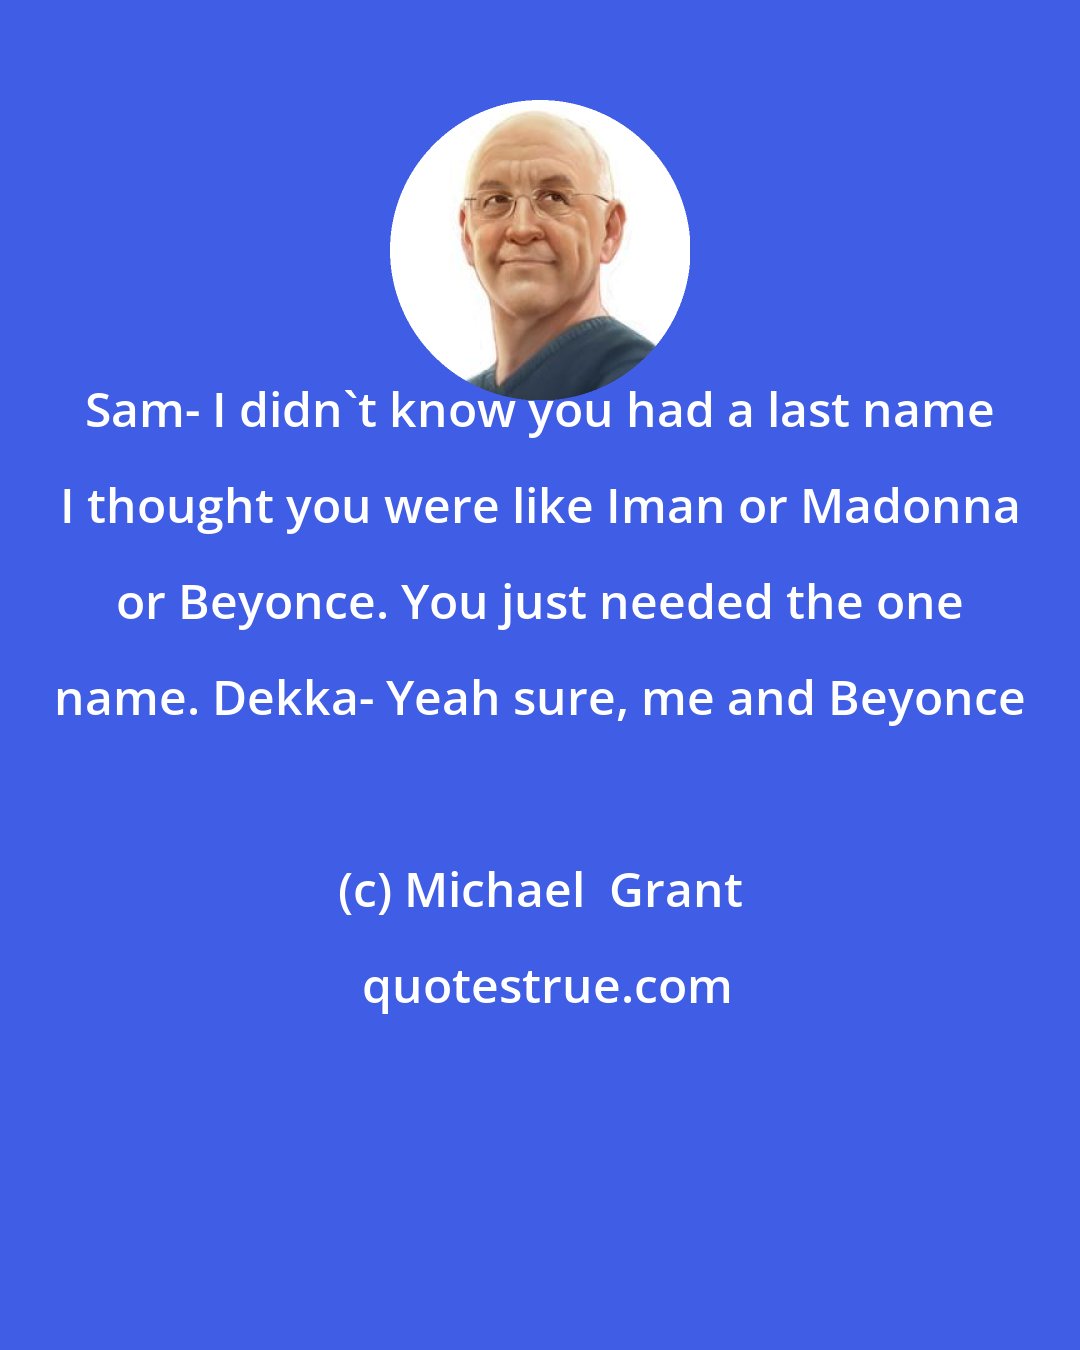 Michael  Grant: Sam- I didn't know you had a last name I thought you were like Iman or Madonna or Beyonce. You just needed the one name. Dekka- Yeah sure, me and Beyonce